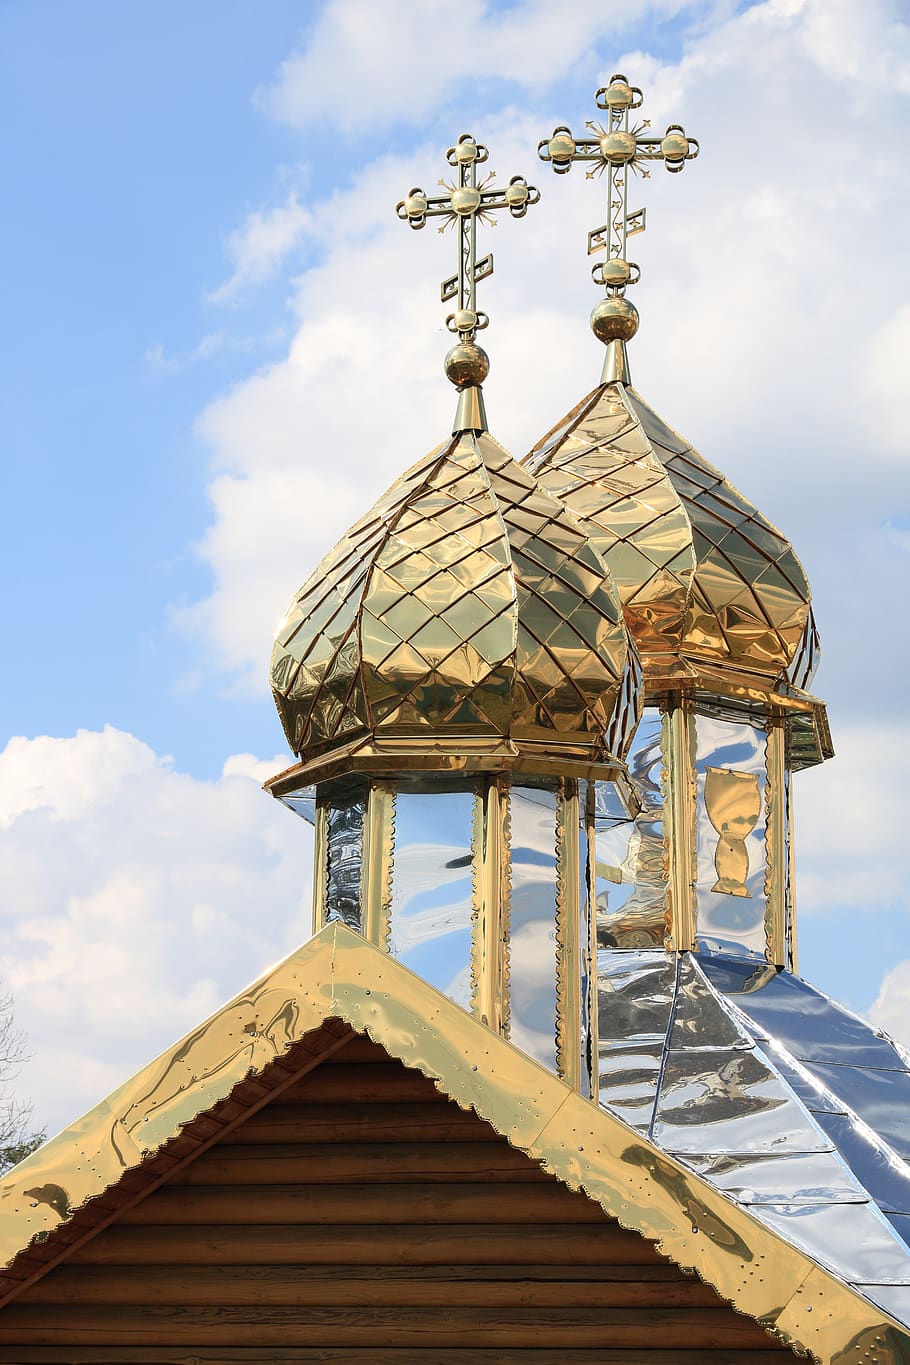 ukraine, church, spire, cross, religion, orthodox, metal plated, gold, built structure, architecture